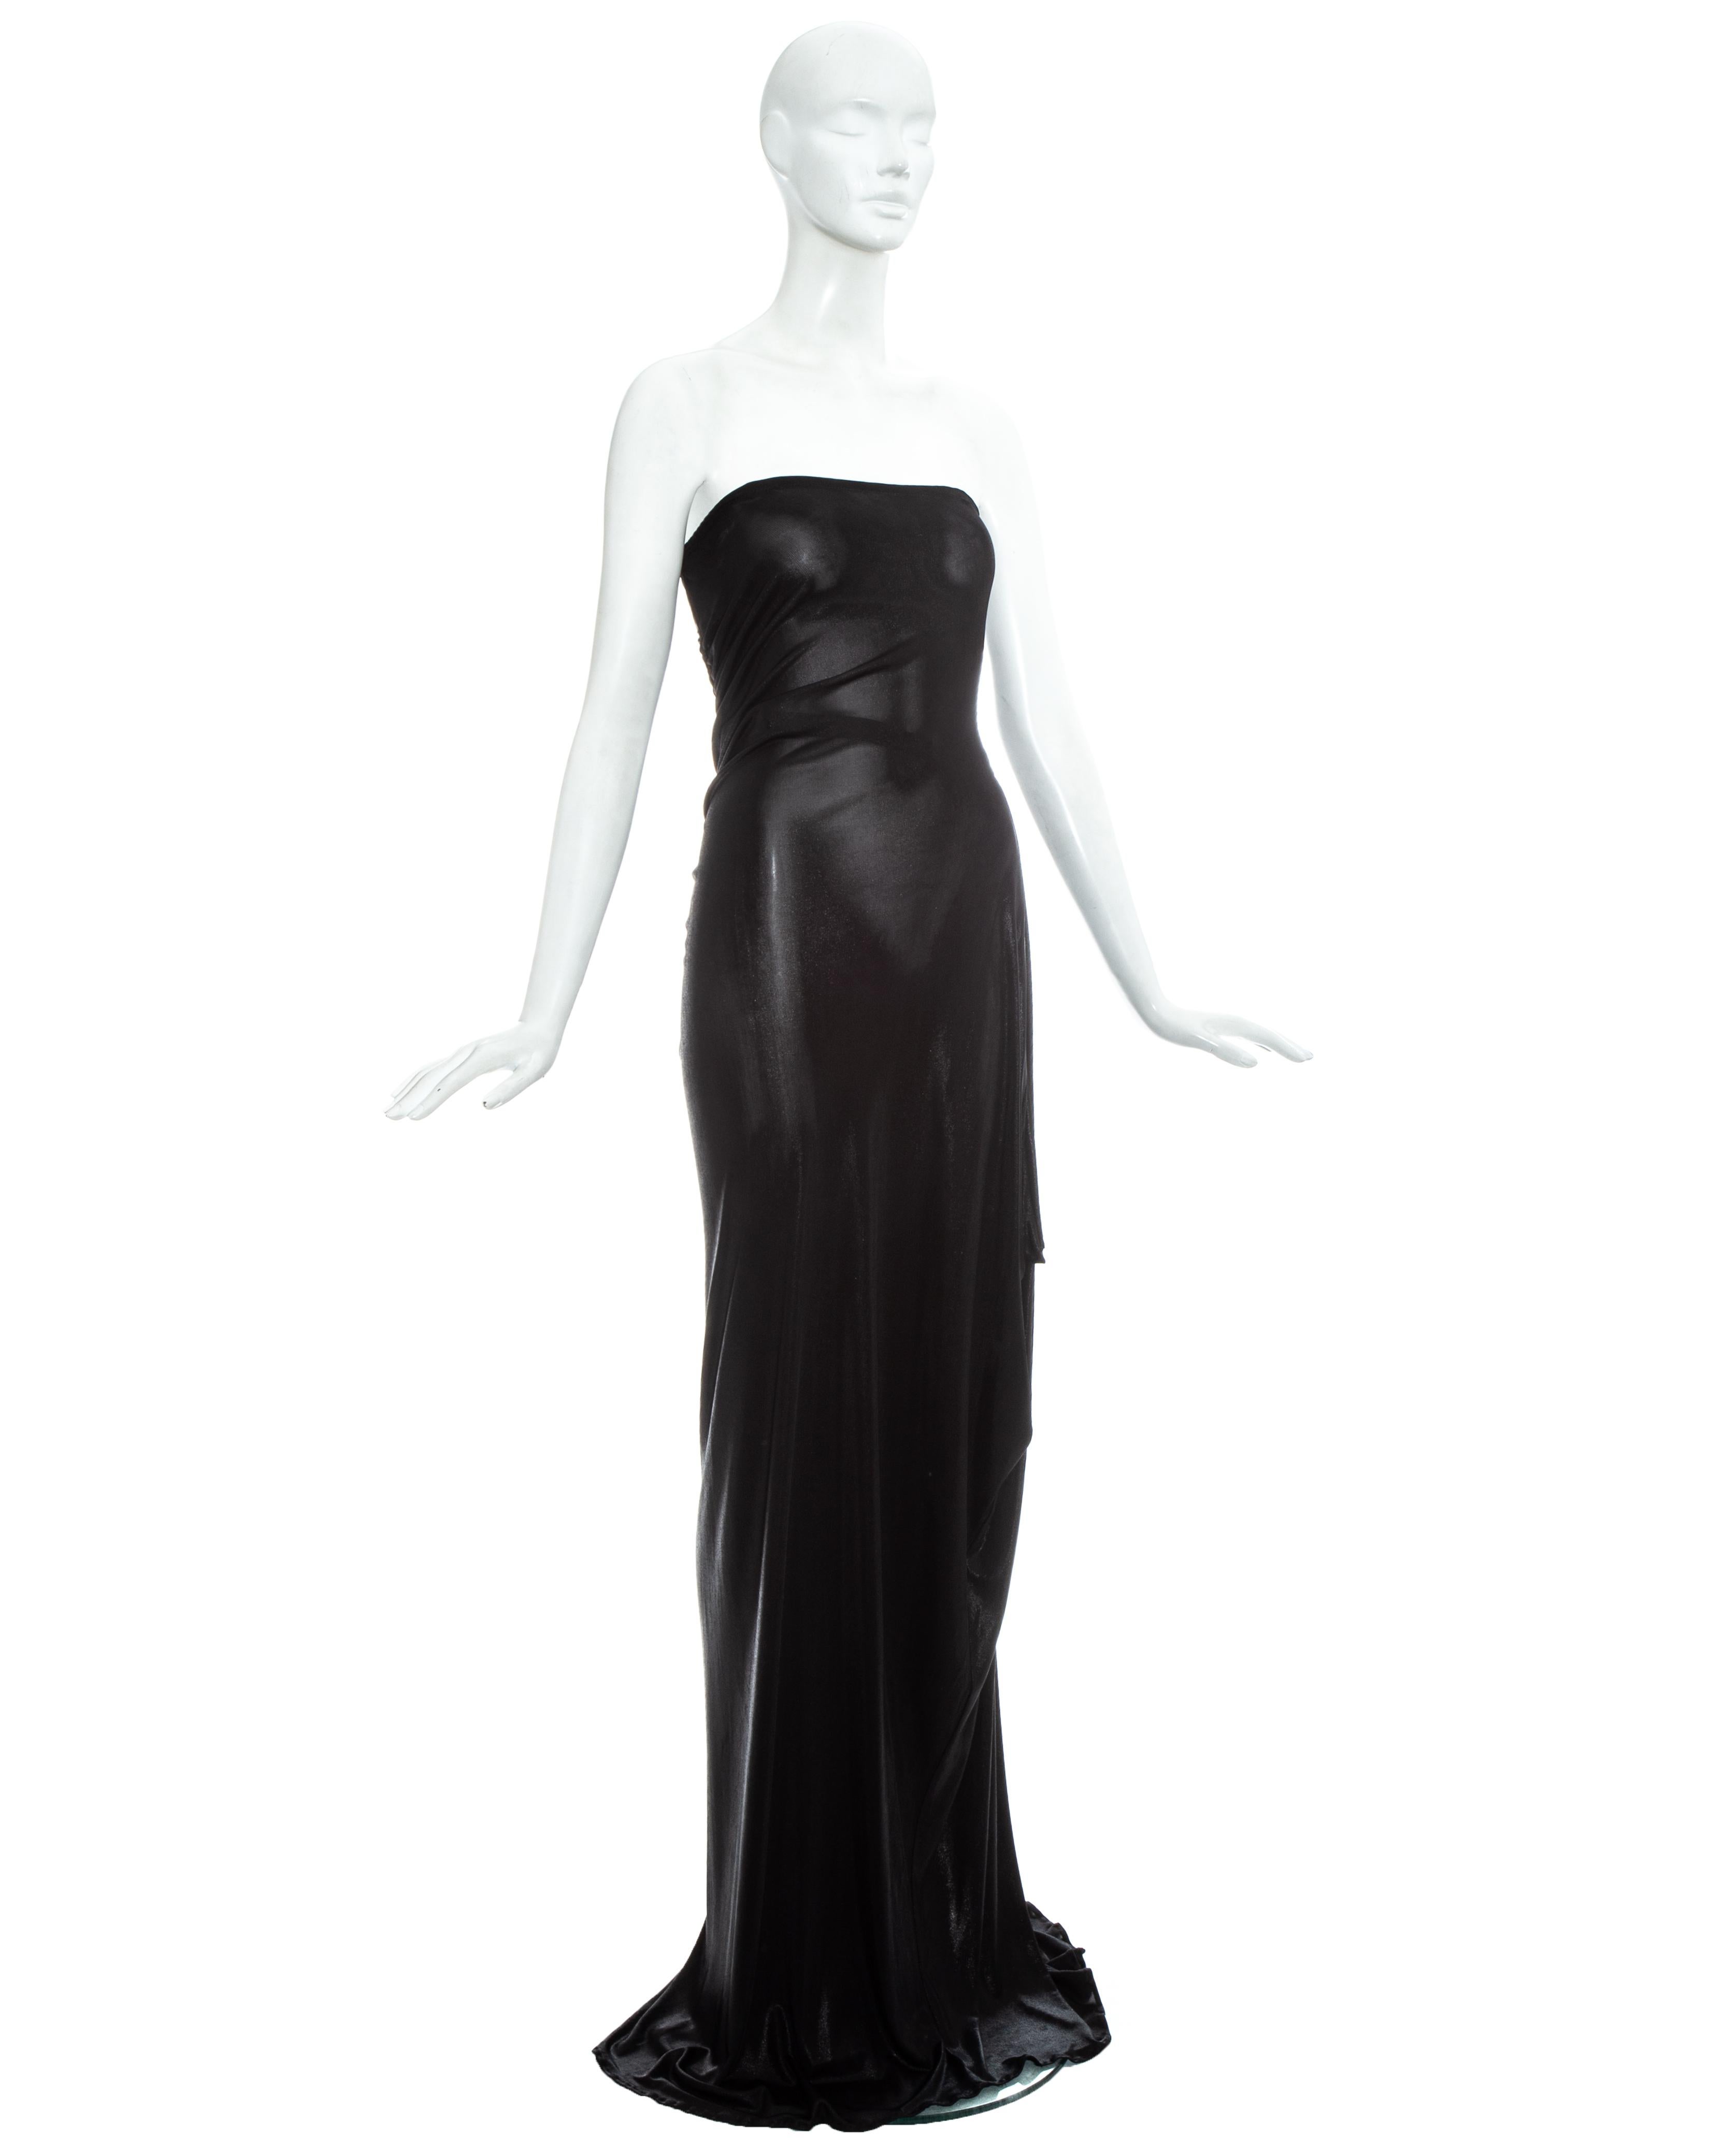 Christian Dior by John Galliano black lycra strapless maxi dress with pleated seam on bust and draped maxi skirt.

Resort 2007